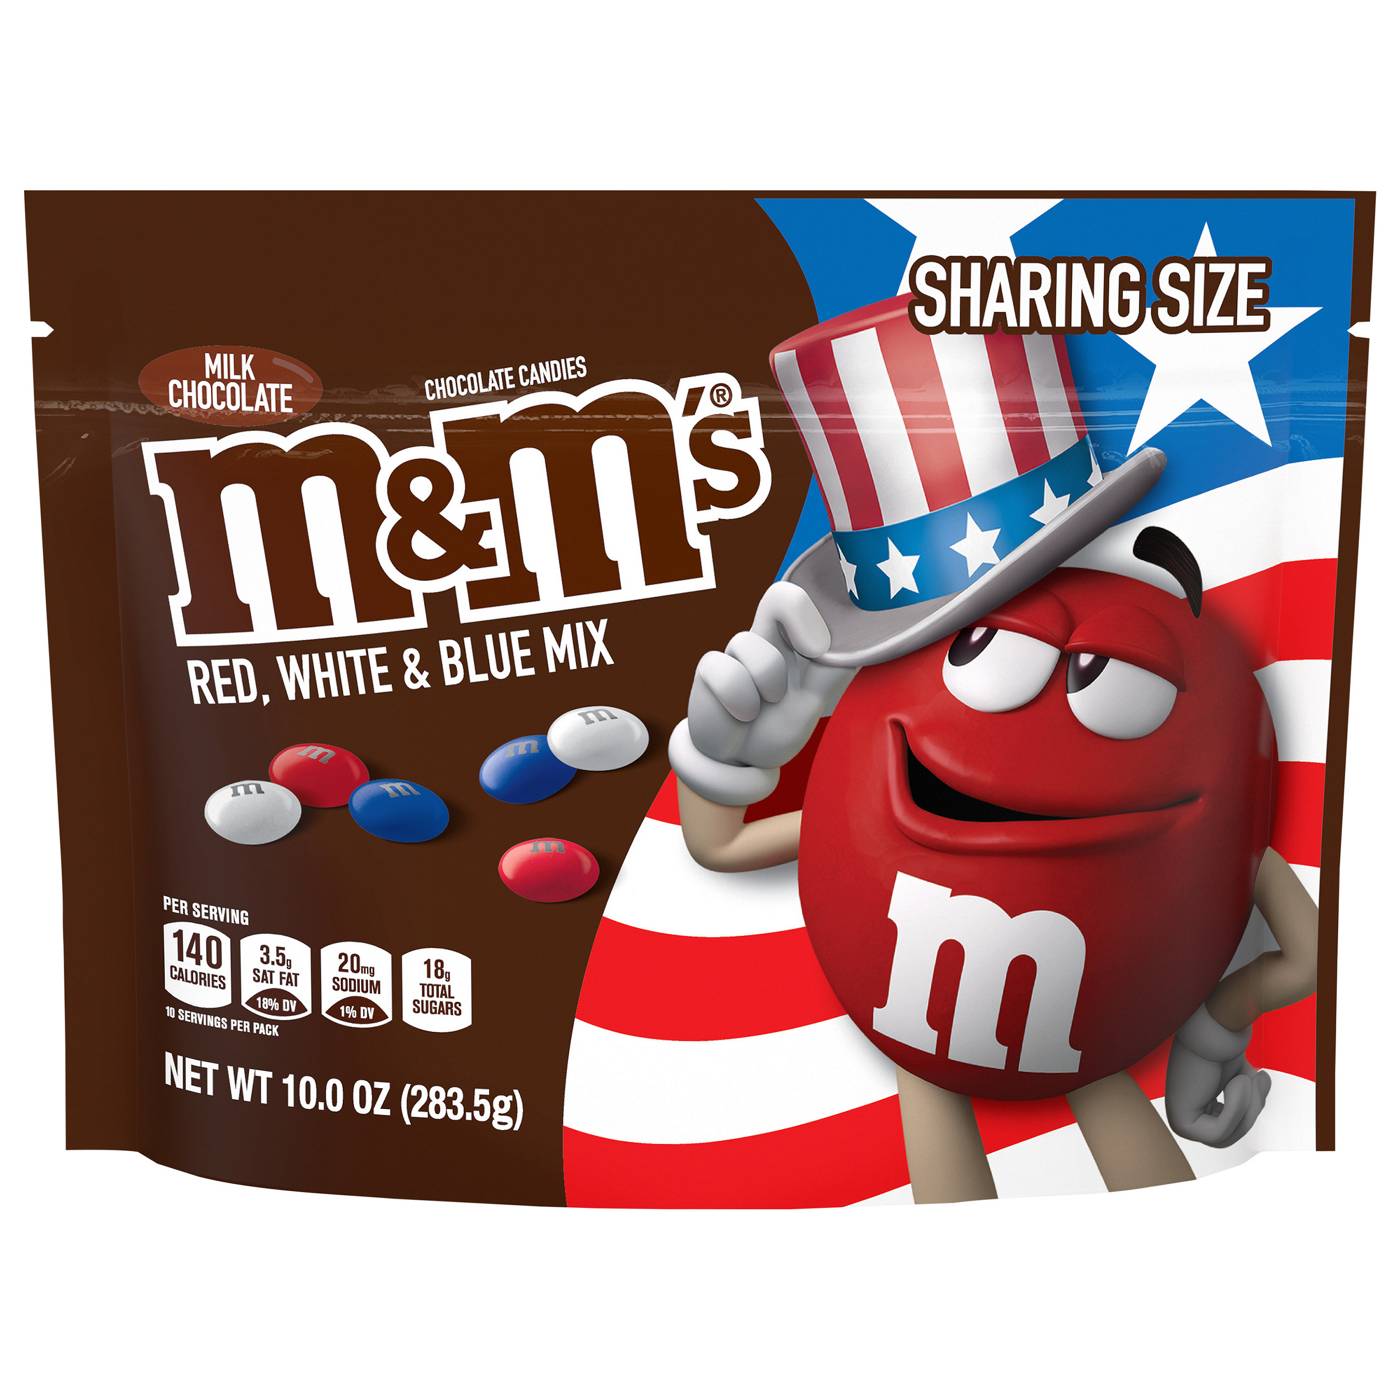 M&M's Chocolate Candies, Peanut, Red, White & Blue Mix, Share Size